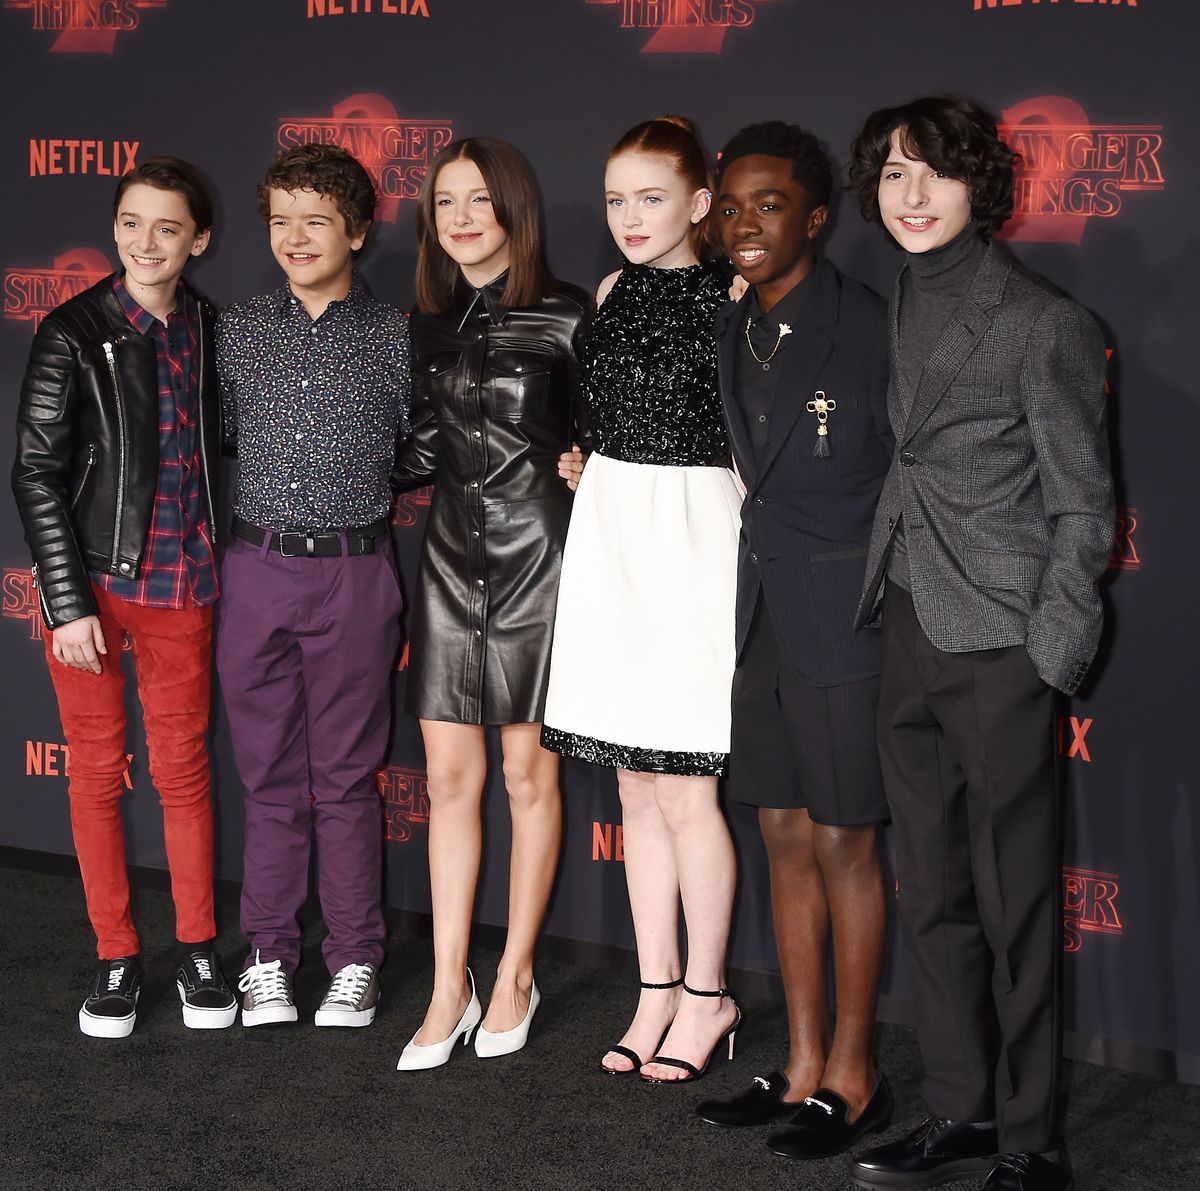 Growing up on the set of 'Stranger Things': 'We're handling it